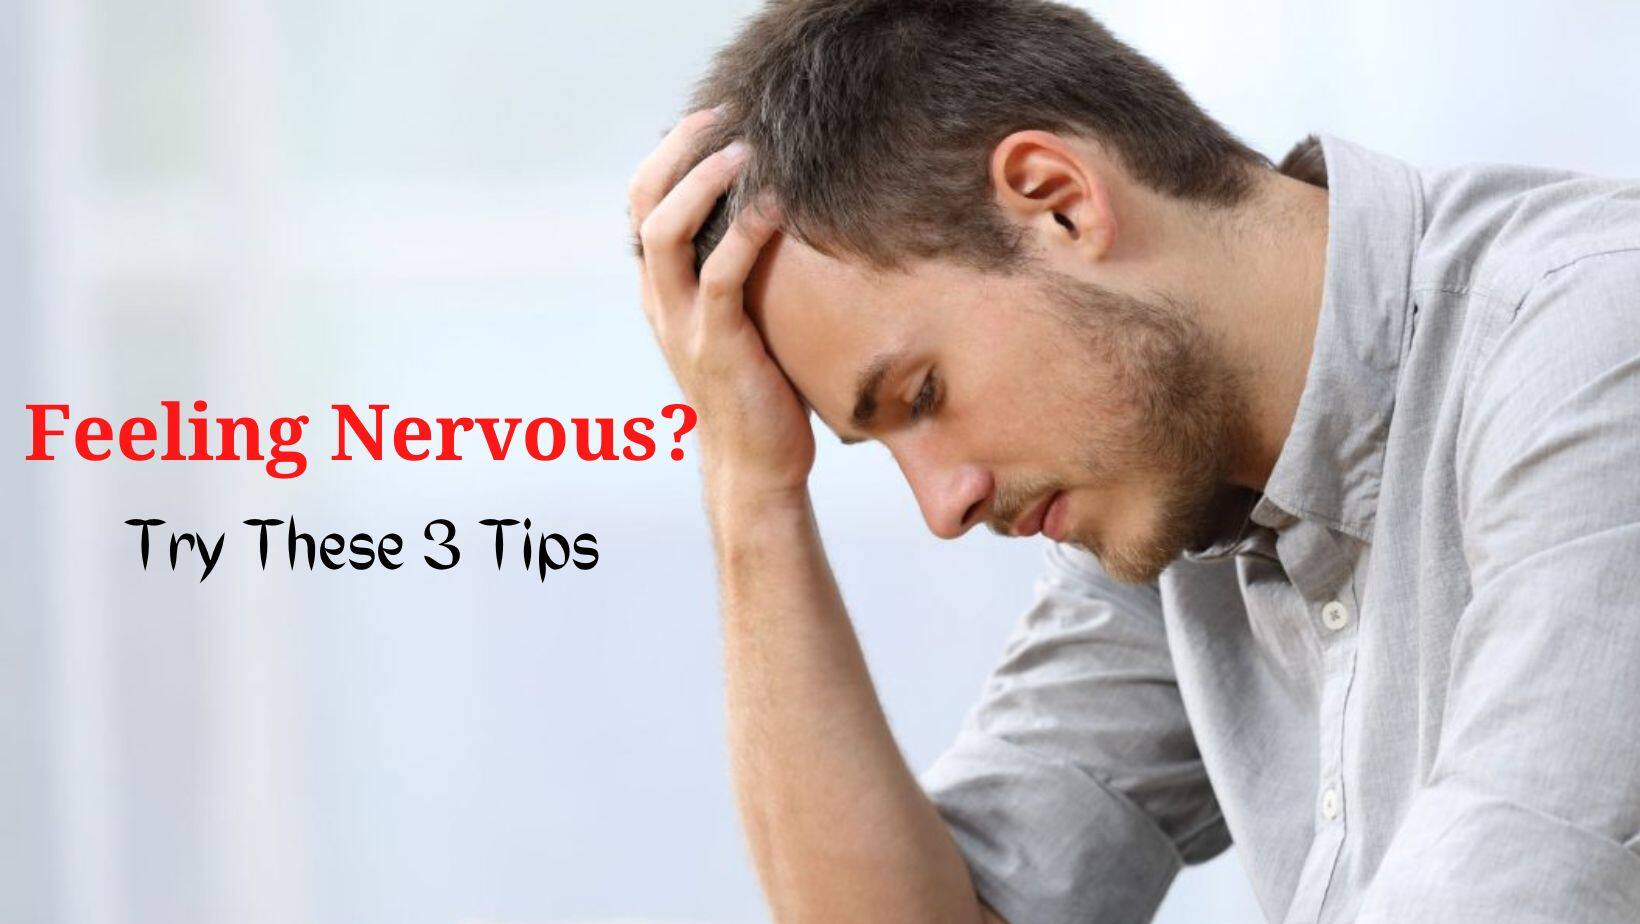 3 Tips To Overcome Extreme Nervousness